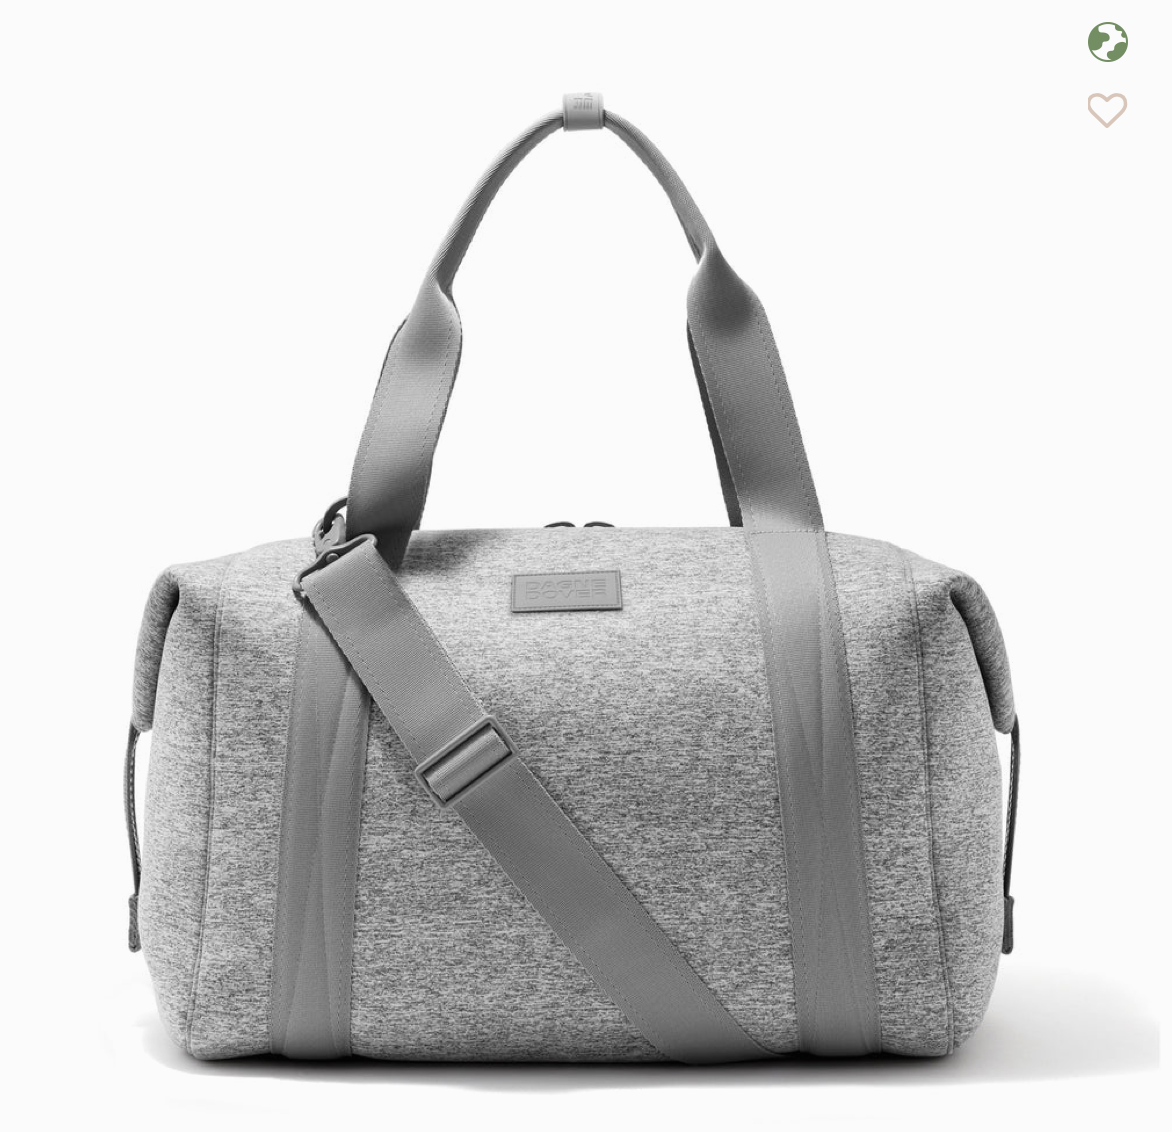 Sew Cute: Sew Cute Travels: Dagne Dover Landon Carryall Review